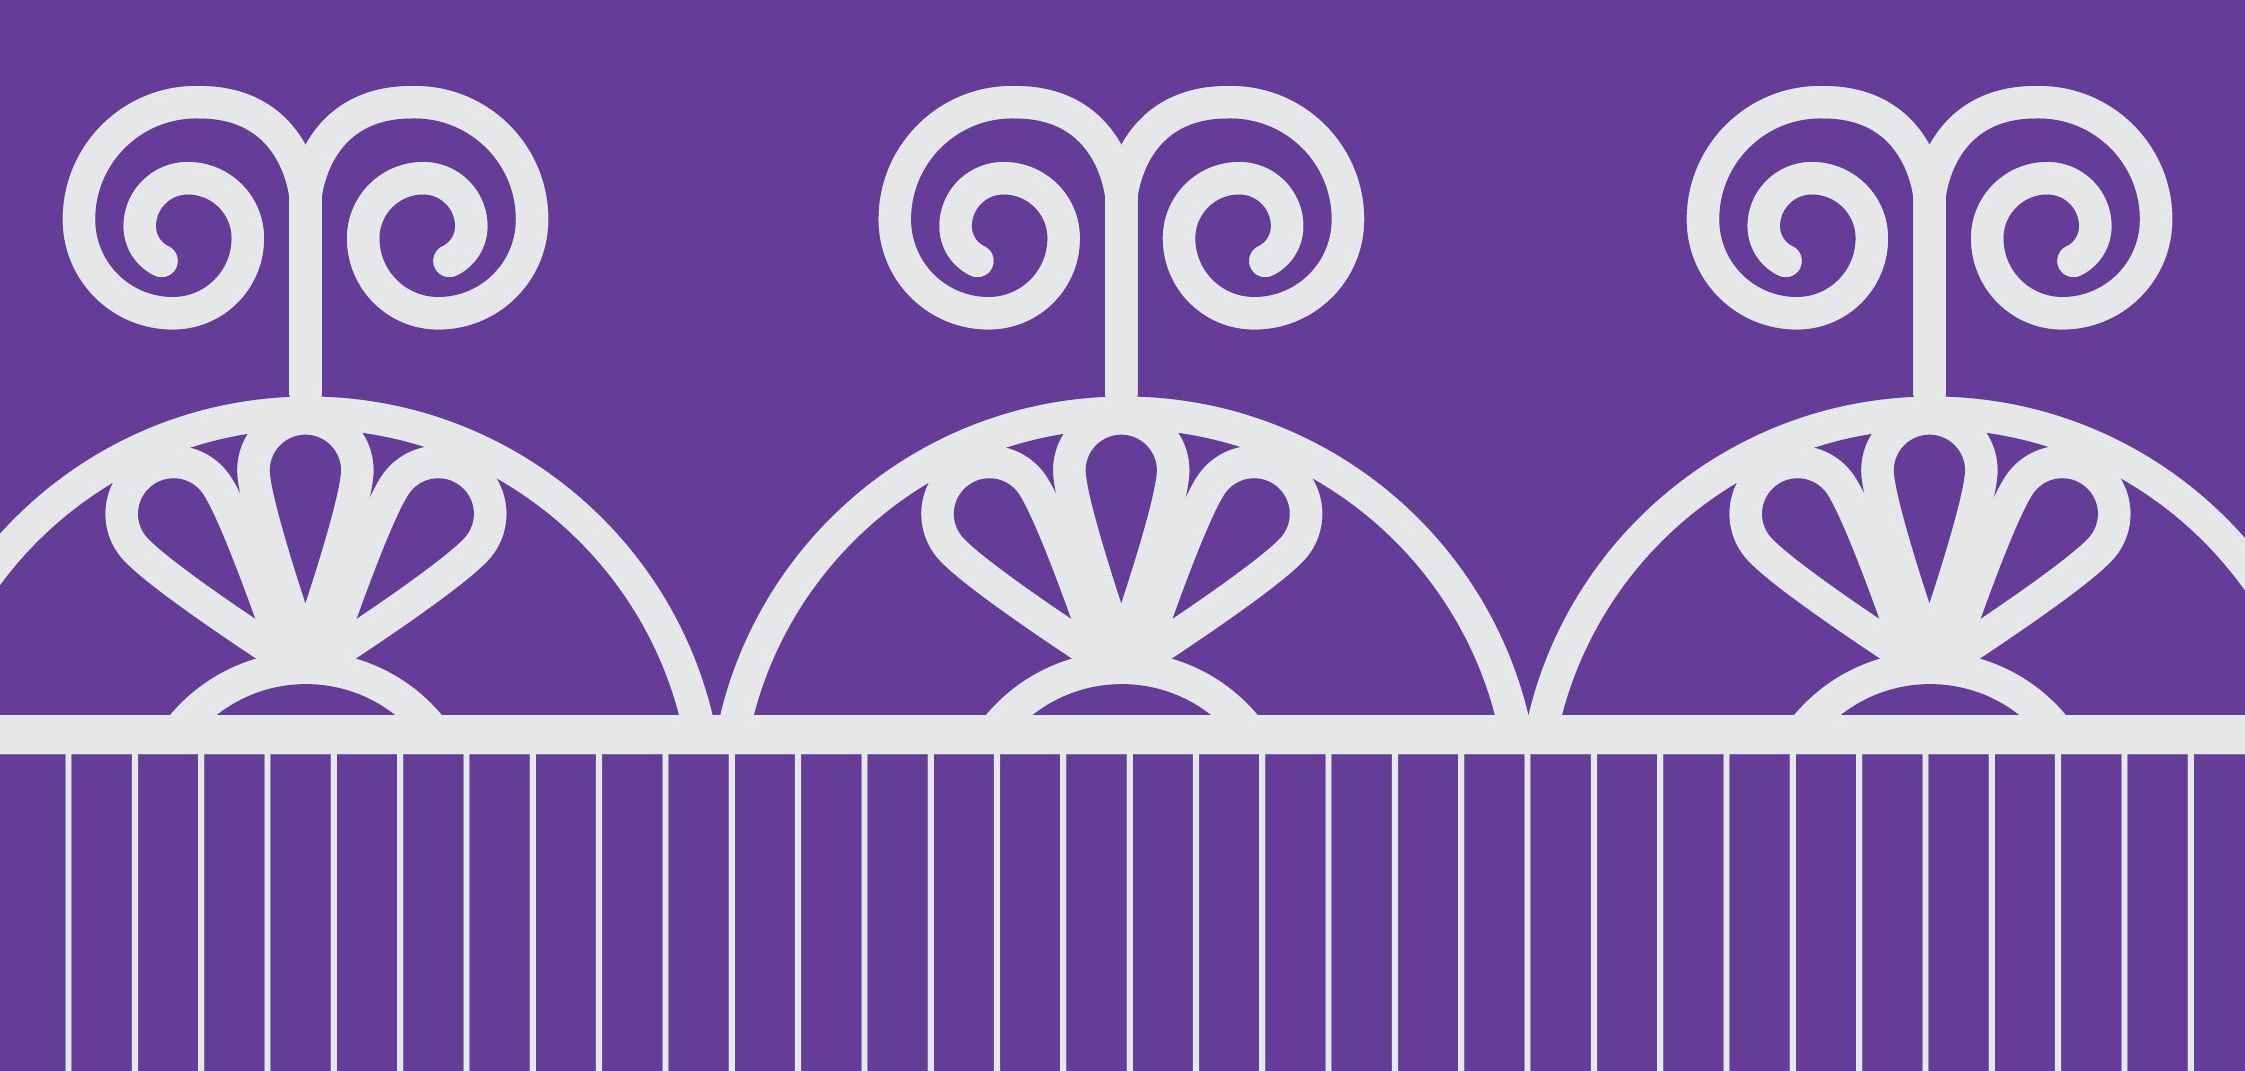 The Sky Dome symbol in white against a purple background.